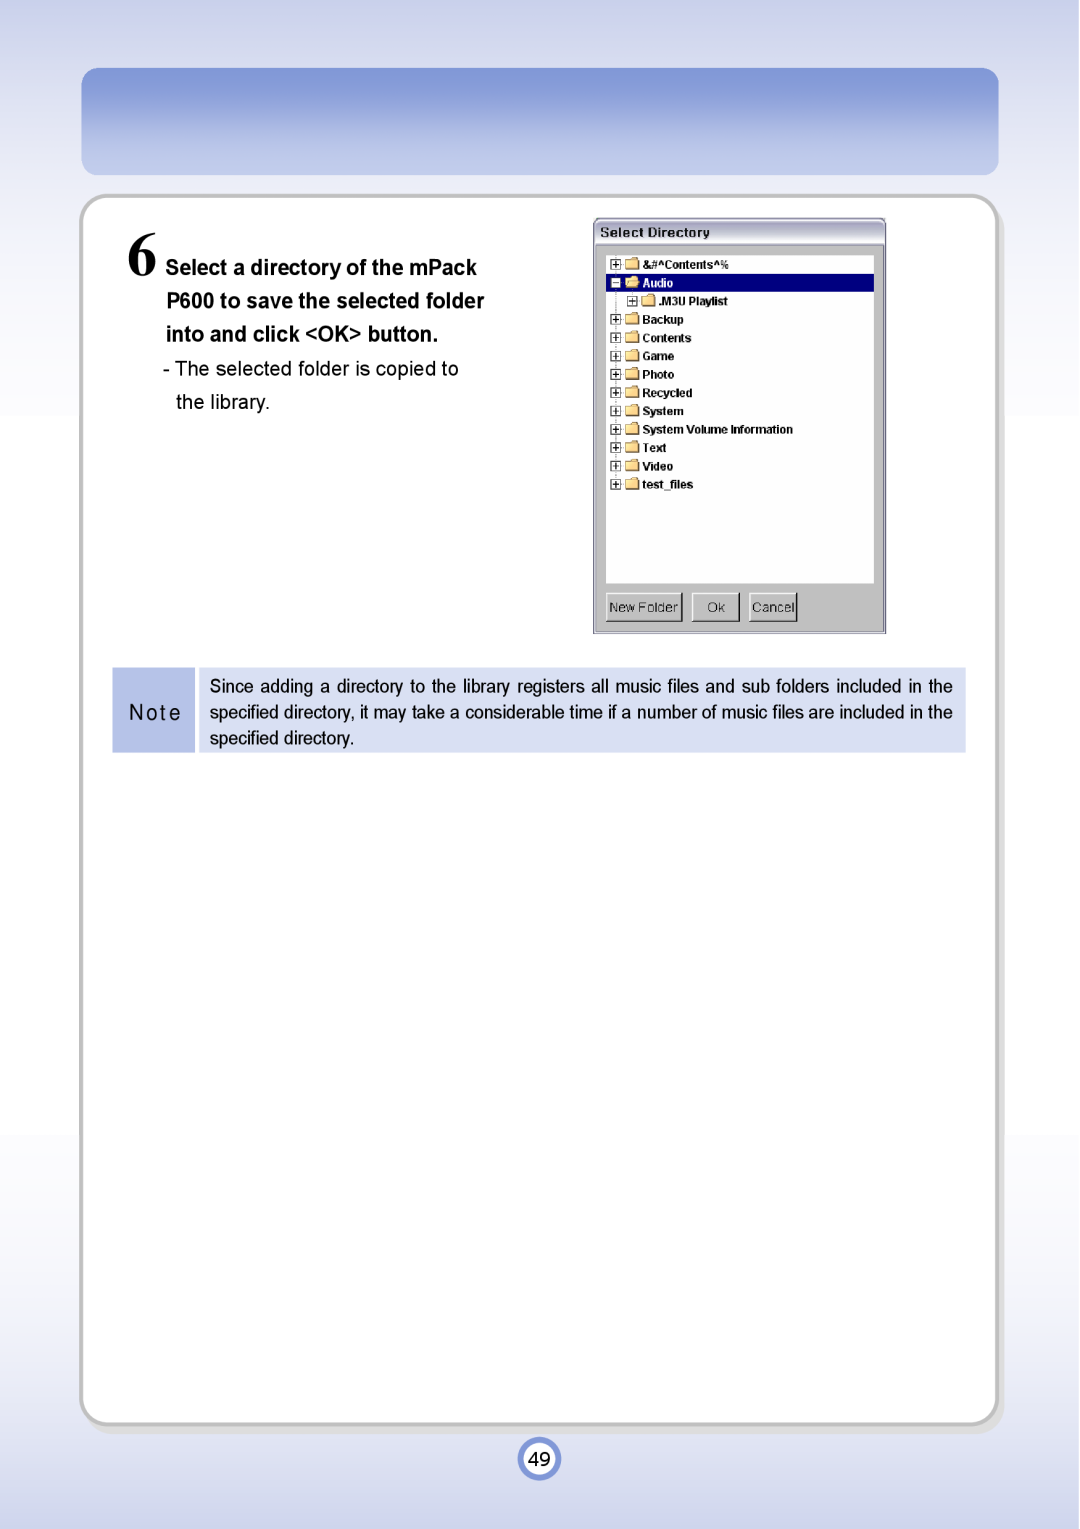 PQI P600 manual Select a directory of the mPack, The selected folder is copied to the library 